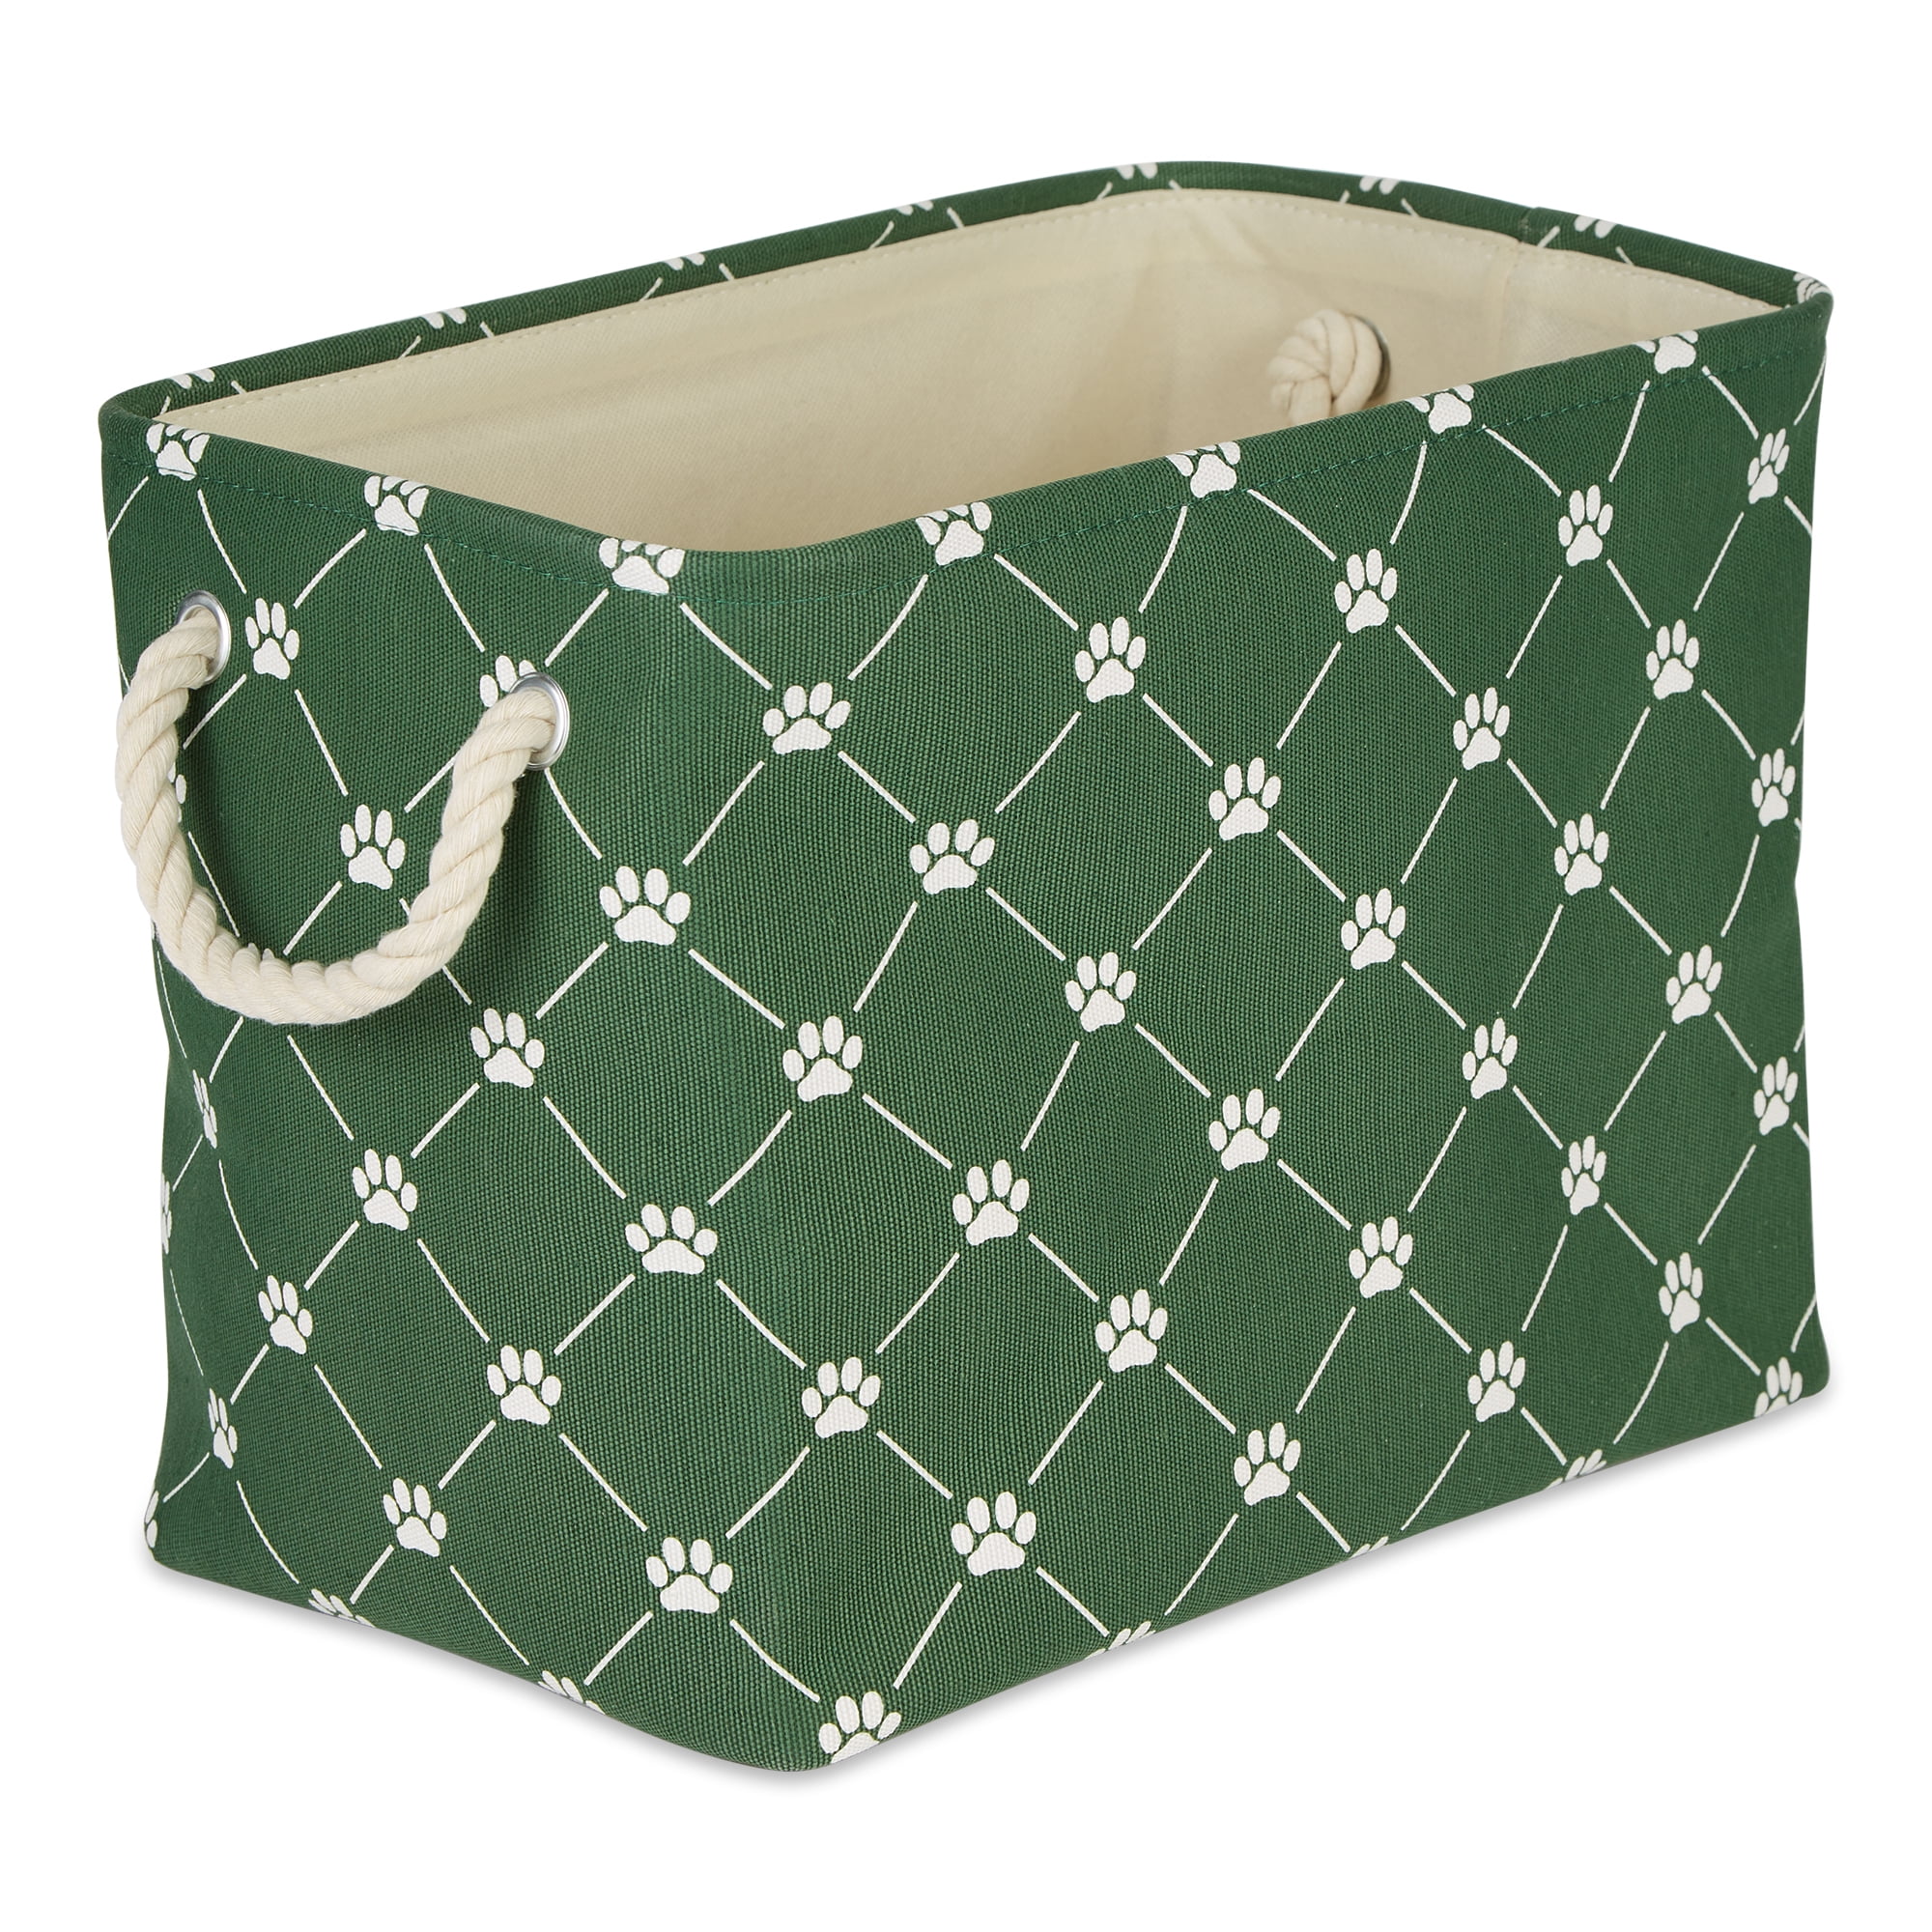 Picture of Design Imports CAMZ14235 Polyester Trellis Paw Rectangle Pet Bin, Hunter Green